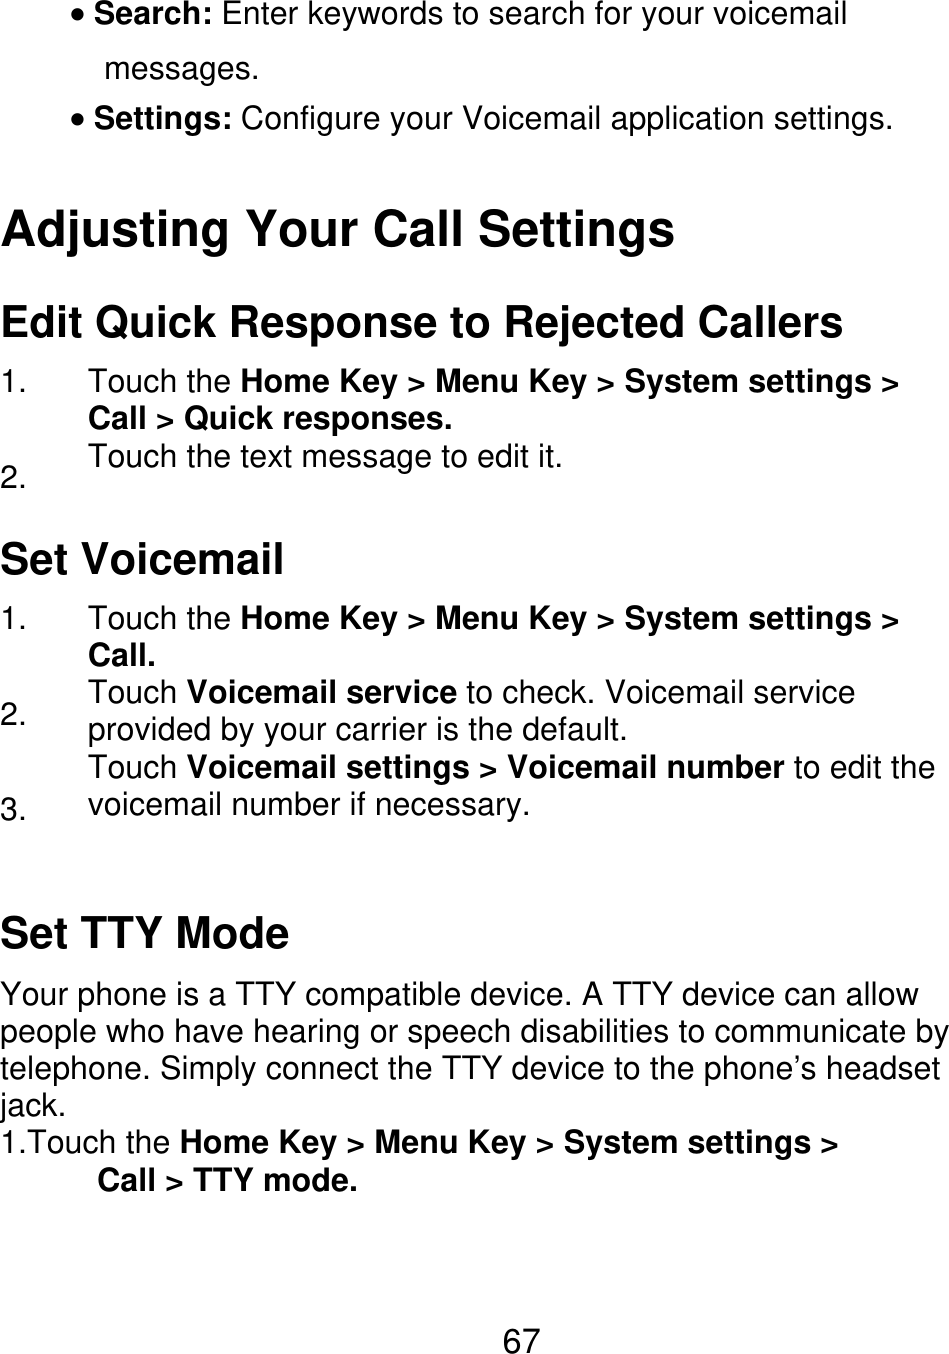 Search: Enter keywords to search for your voicemail messages. Settings: Configure your Voicemail application settings. Adjusting Your Call Settings Edit Quick Response to Rejected Callers 1. 2. Touch the Home Key &gt; Menu Key &gt; System settings &gt; Call &gt; Quick responses. Touch the text message to edit it. Set Voicemail 1. 2. 3. Touch the Home Key &gt; Menu Key &gt; System settings &gt; Call. Touch Voicemail service to check. Voicemail service provided by your carrier is the default. Touch Voicemail settings &gt; Voicemail number to edit the voicemail number if necessary. Set TTY Mode Your phone is a TTY compatible device. A TTY device can allow people who have hearing or speech disabilities to communicate by telephone. Simply connect the TTY device to the phone’s headset jack. 1.Touch the Home Key &gt; Menu Key &gt; System settings &gt;       Call &gt; TTY mode. 67 